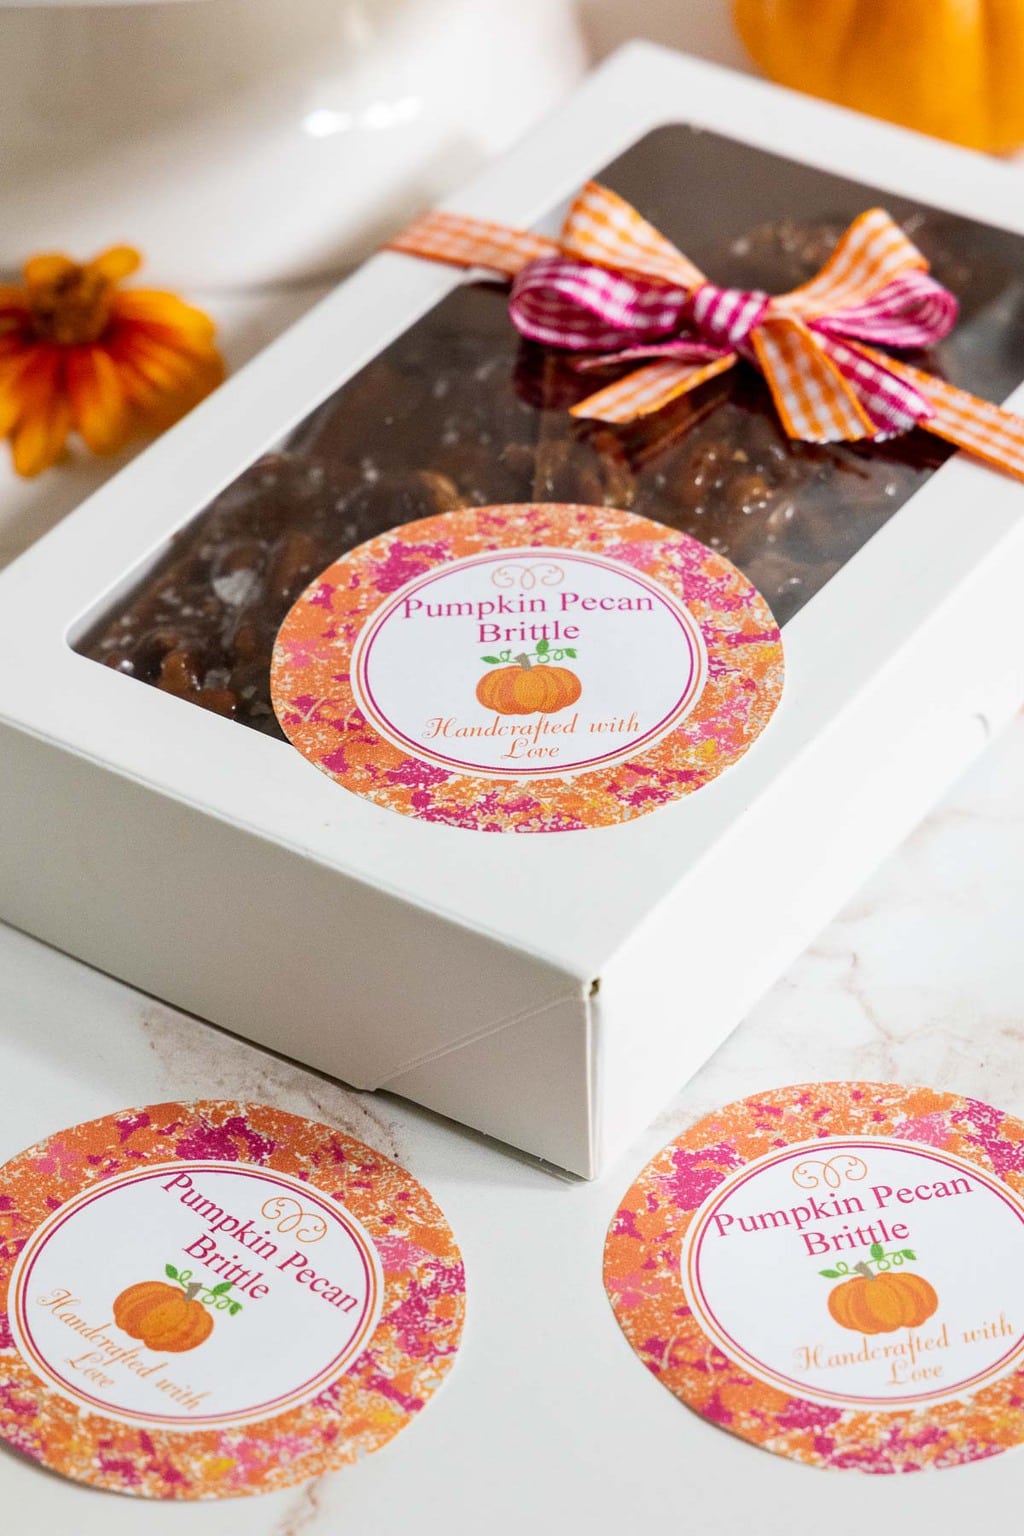 Vertical photo of a gift box filled with Sea Salted Pumpkin Pecan Brittle with custom gift labels on the box.